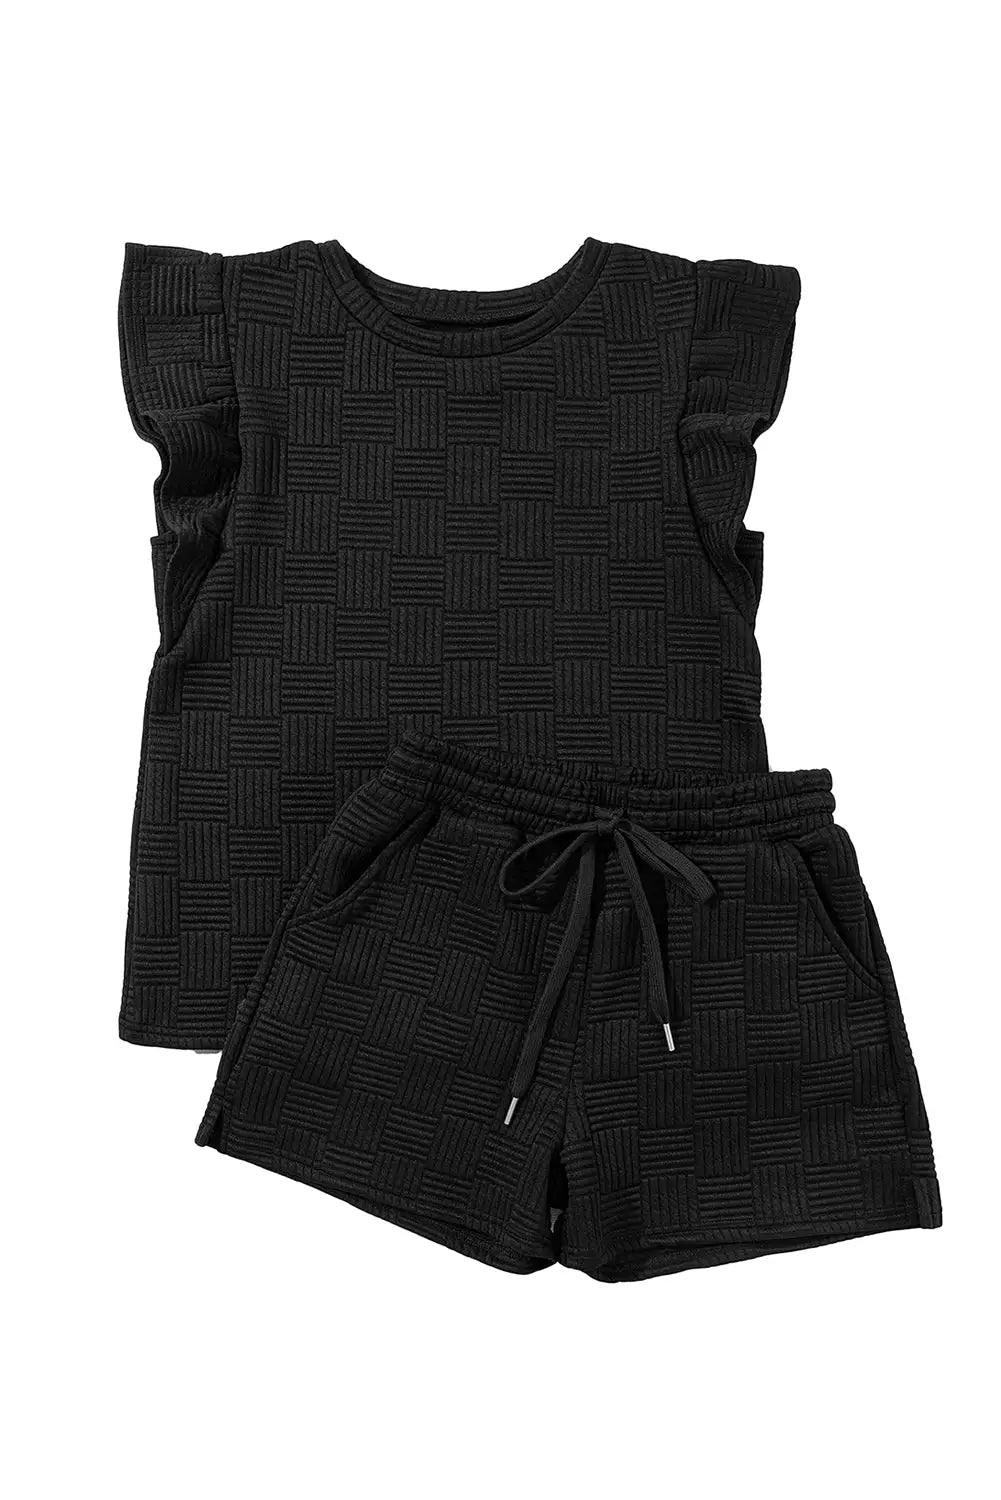 Ruffled sleeve tee and shorts set - two piece sets